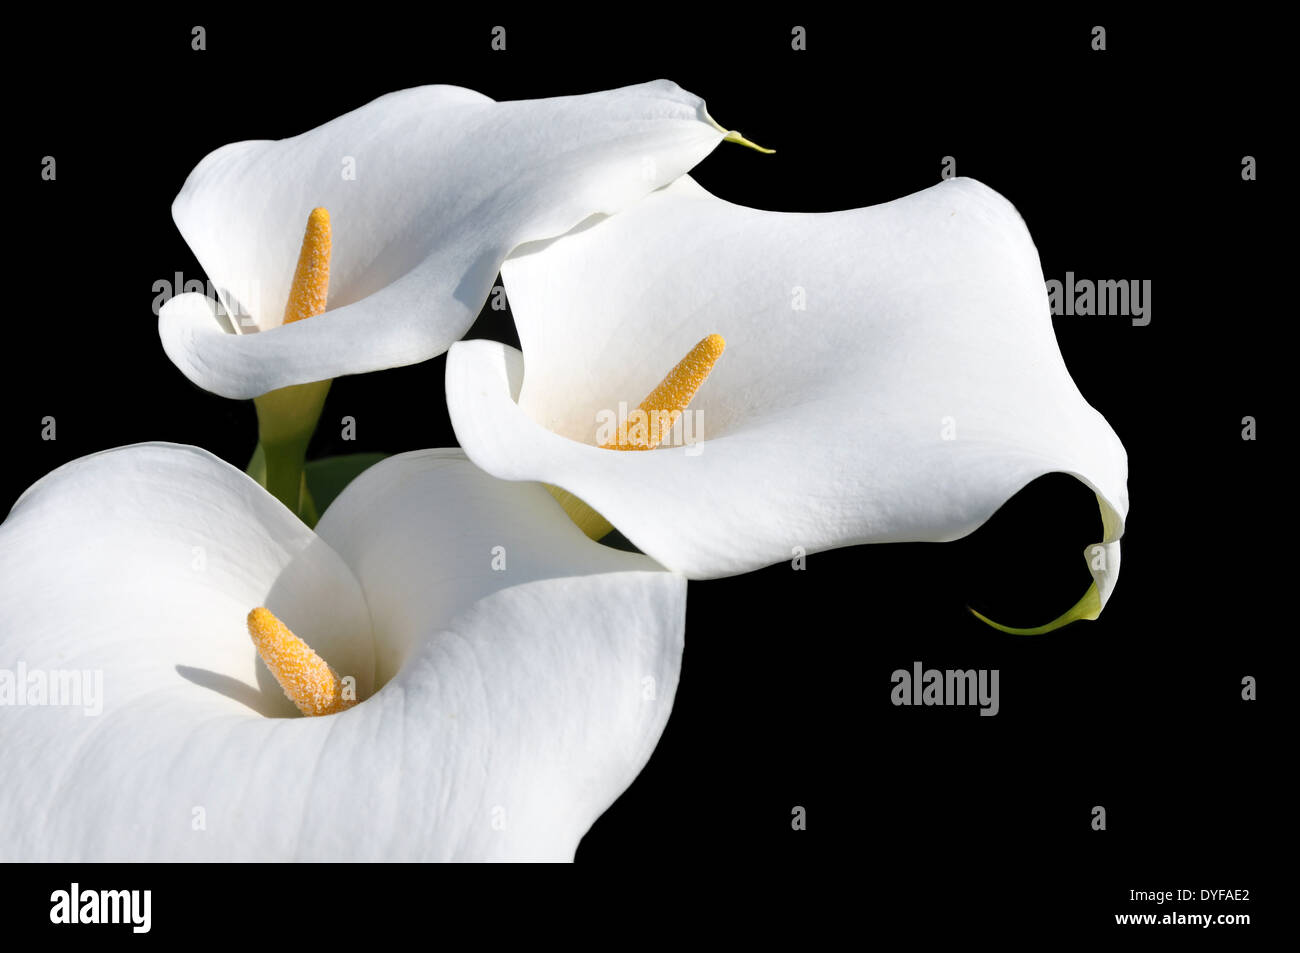 Arum Lilly isolated in black Stock Photo